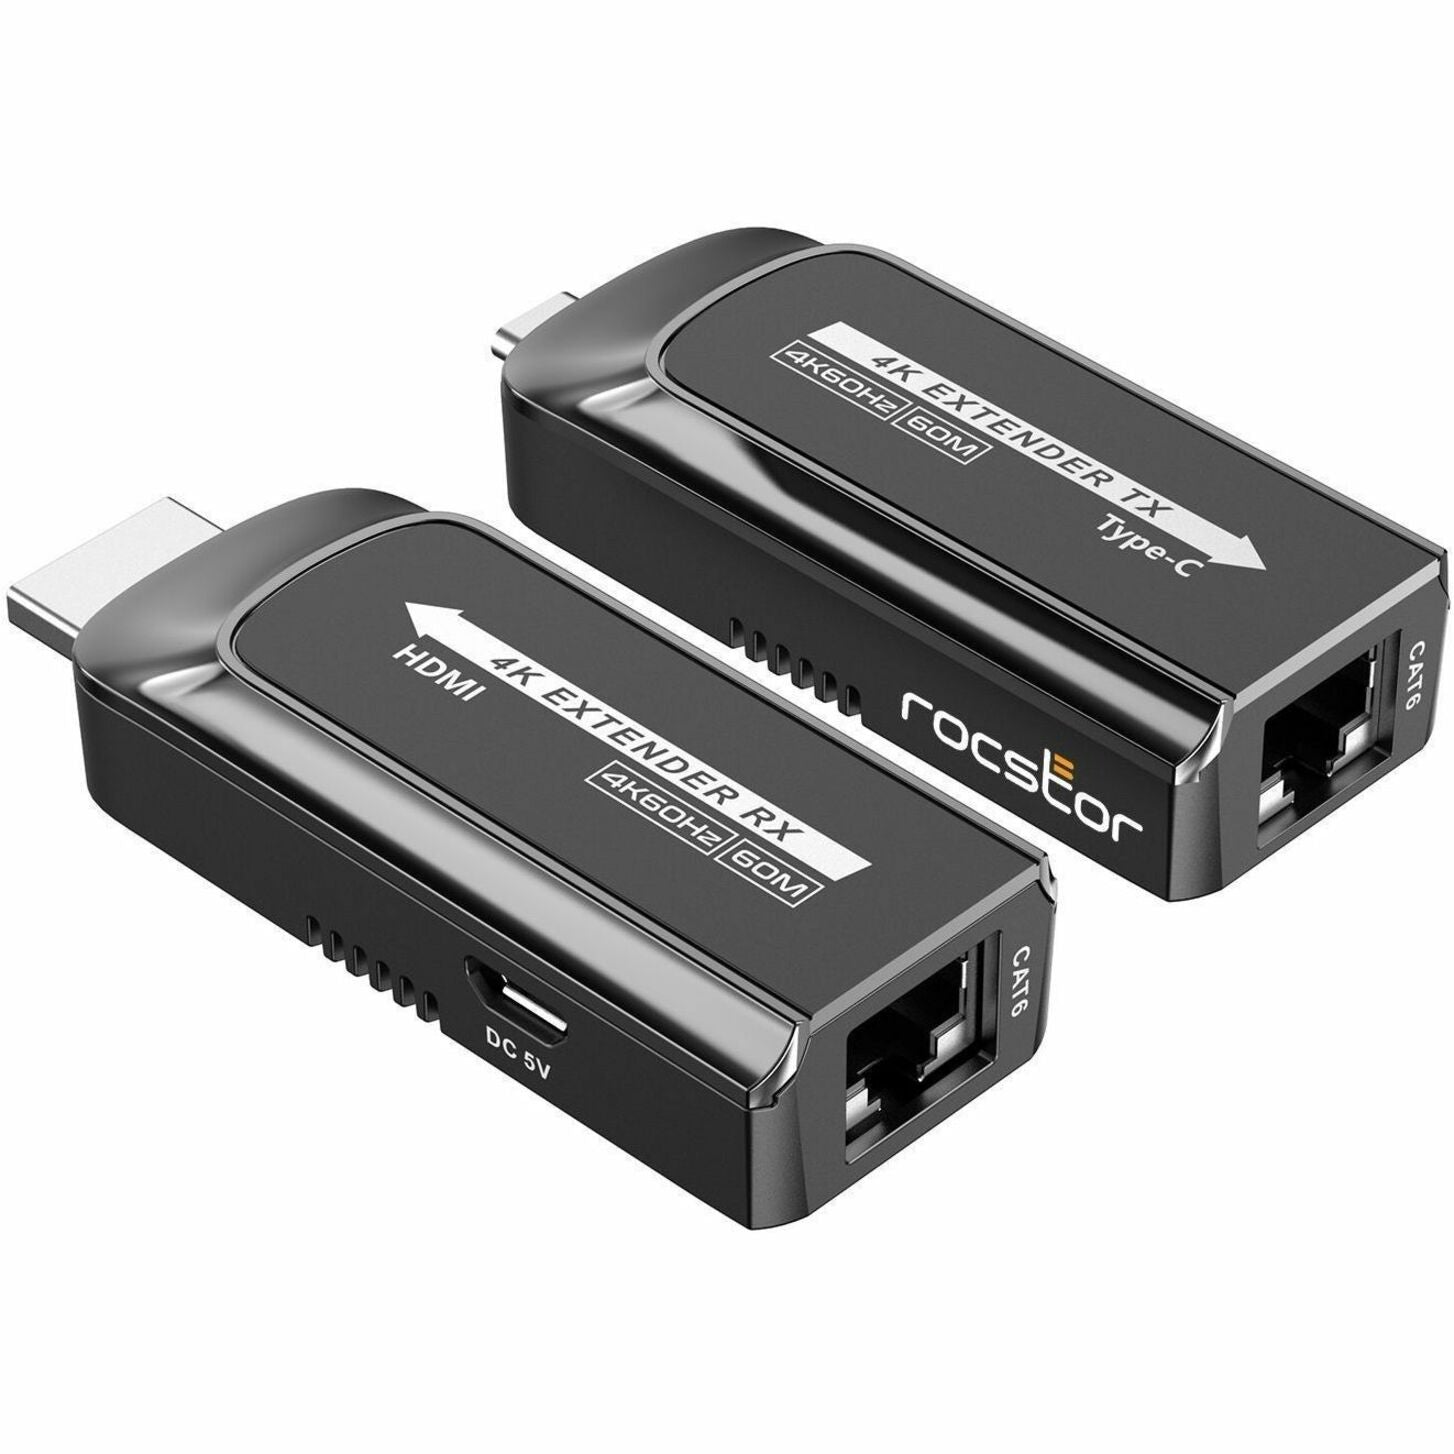 Rocstor Y10G007-B1 USB 3.1 Type-C to HDMI 2.0 Adapter, 4K Video Support, 2-Year Warranty